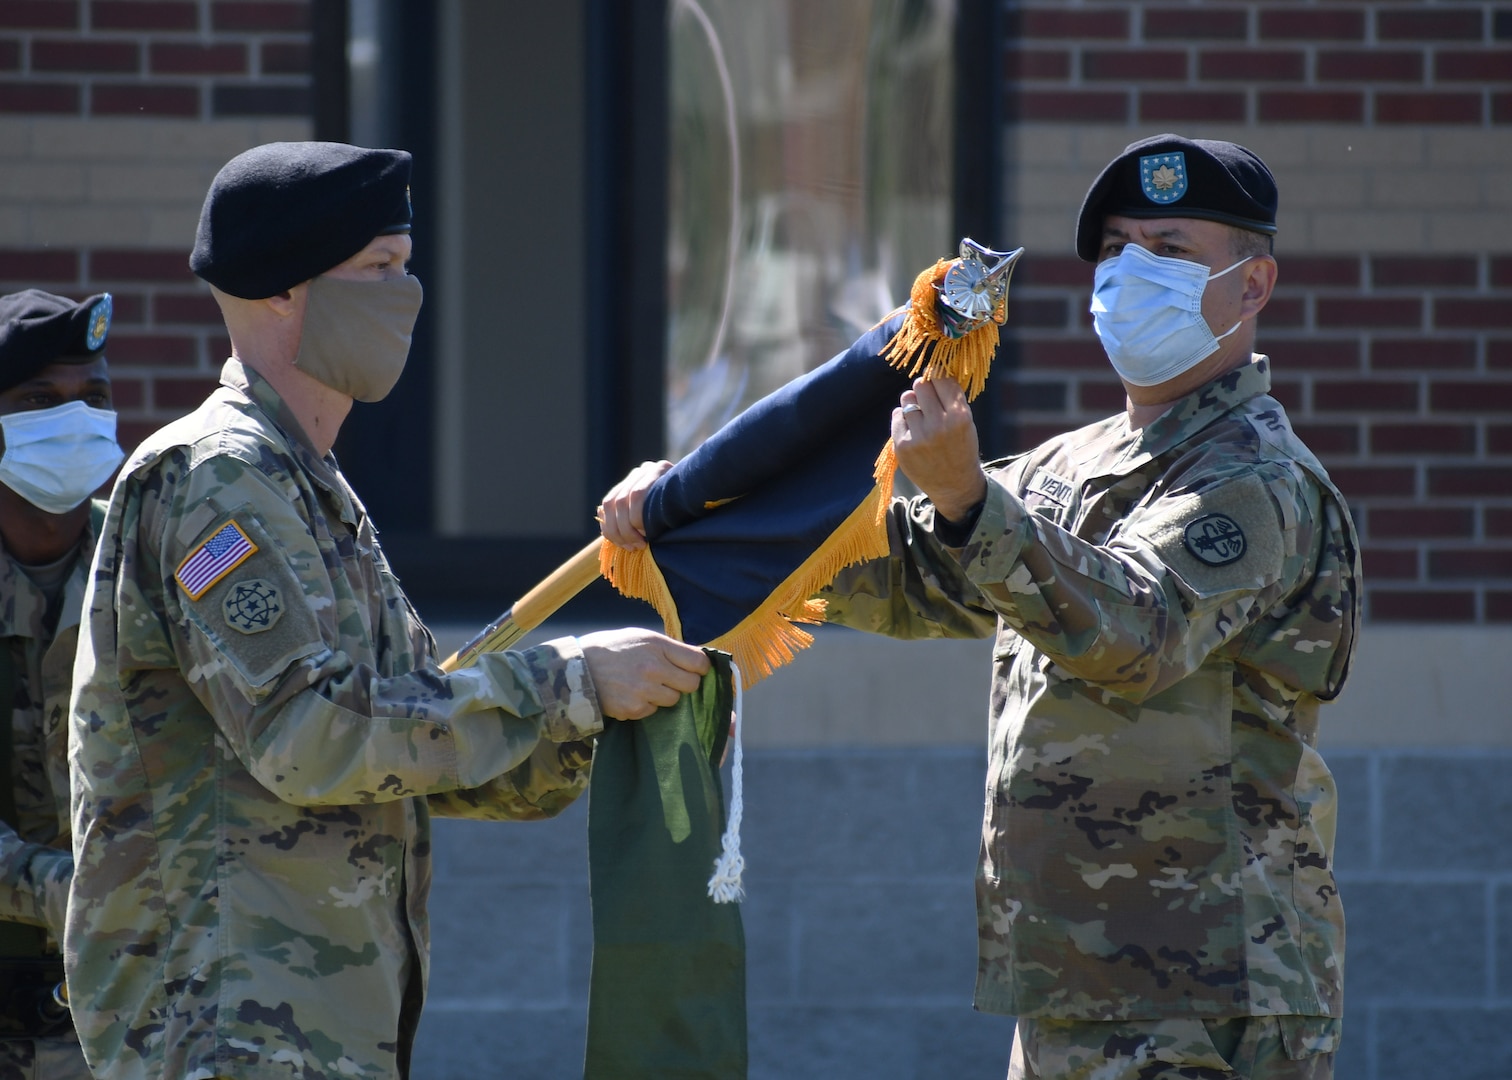 Lt. Col. Robert P. Venton (right) and Command Sgt. Maj. Gordon Lawitzke (left), the commander and senior enlisted leader respectively of the Fort Drum Soldier Recovery Unit, prepare to case the iconic colors of the 3rd Battalion, 85th Mountain Infantry Regiment Warrior Transition Unit (WTU) during a re-designation ceremony on Fort Drum, N.Y. June 16, 2020.